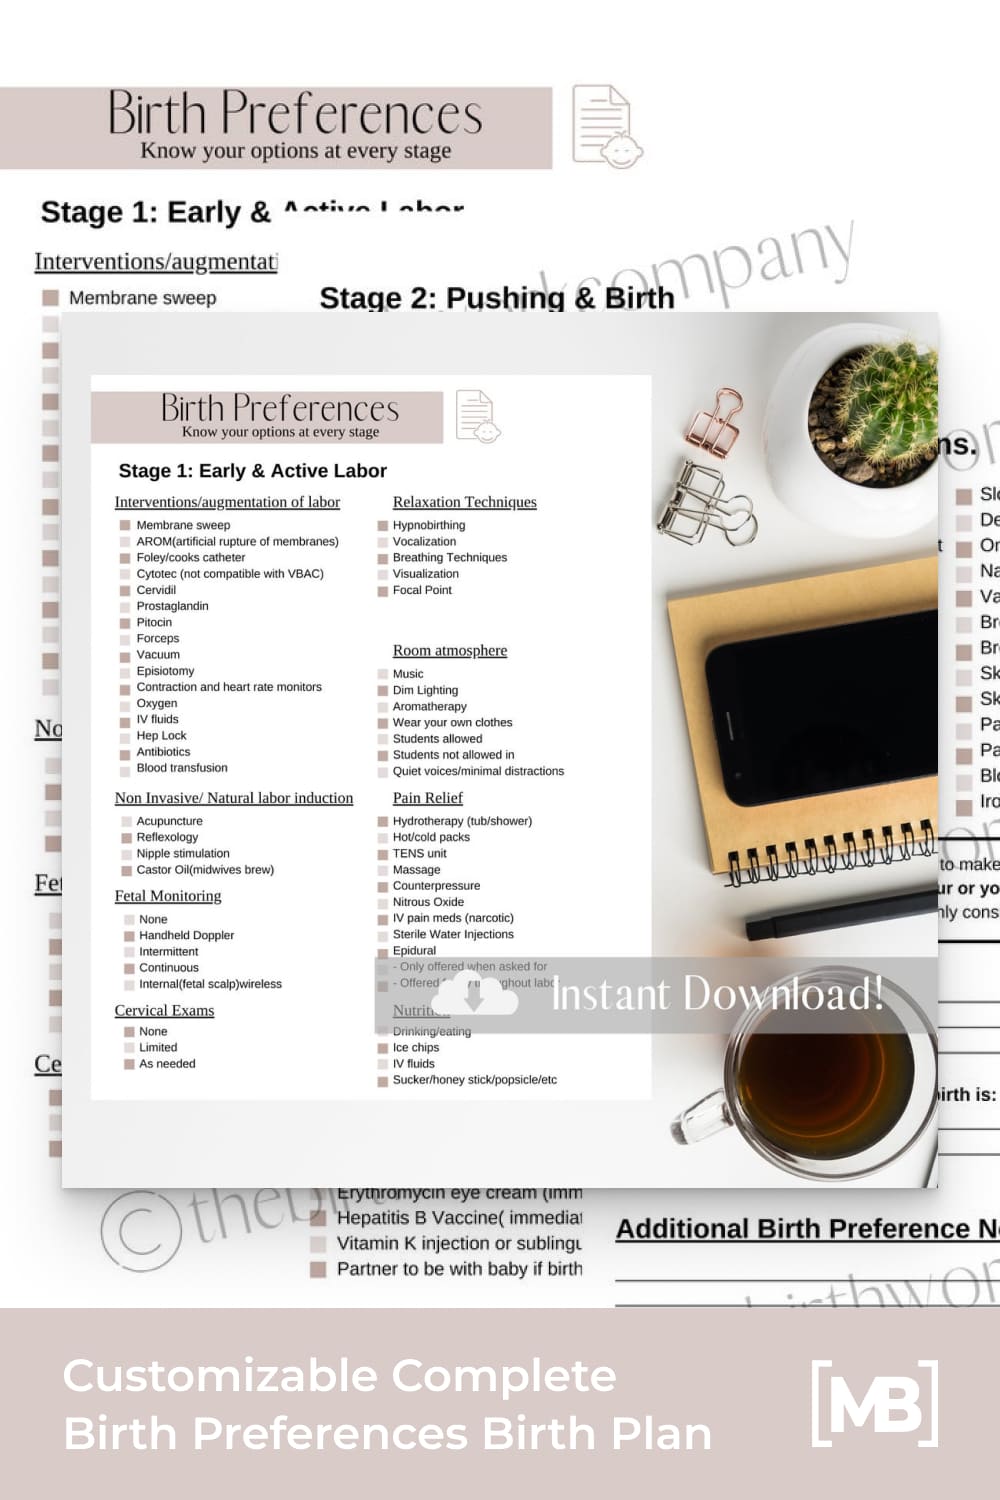 This 3 page, comprehensive birth plan printable is a great tool to help your clients (or yourself) make a plan for birth.